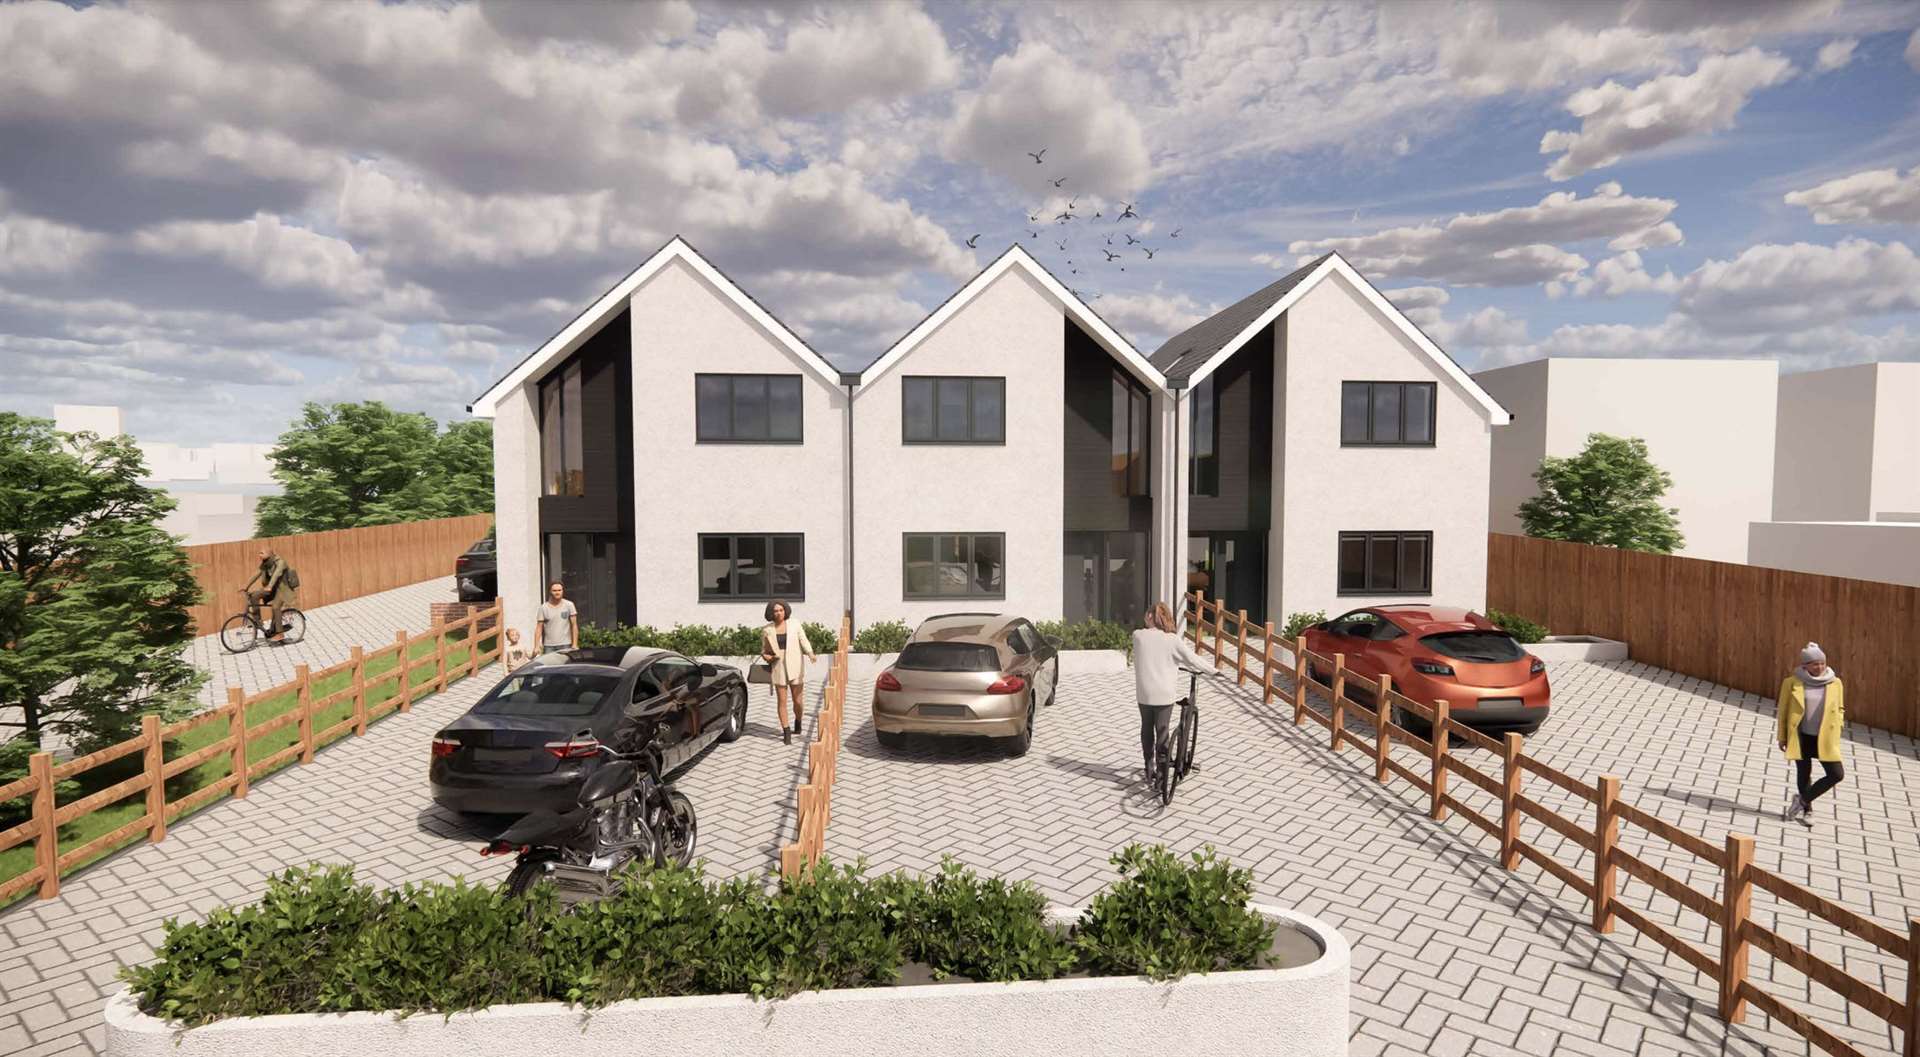 Councillors say the homes look “stark” and out of character. Picture: OSG Architecture